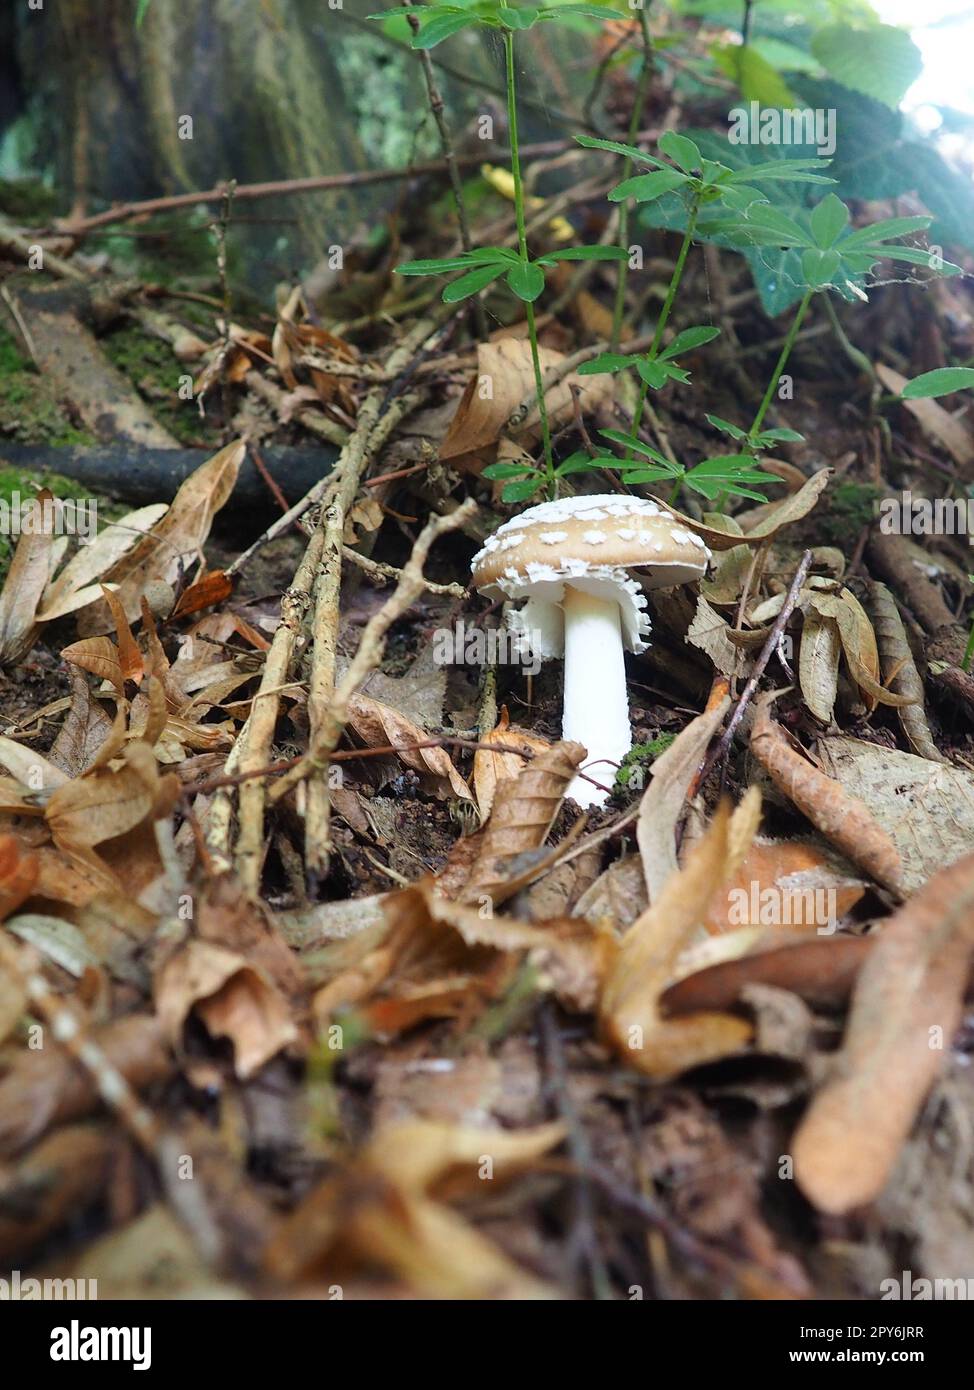 Parasol mushroom Macrolepiota procera is a species of mushrooms of the champignon family. Fruit bodies are cap-shaped, central. Saprotroph, grows on sandy soils in light forests in glades and edges Stock Photo